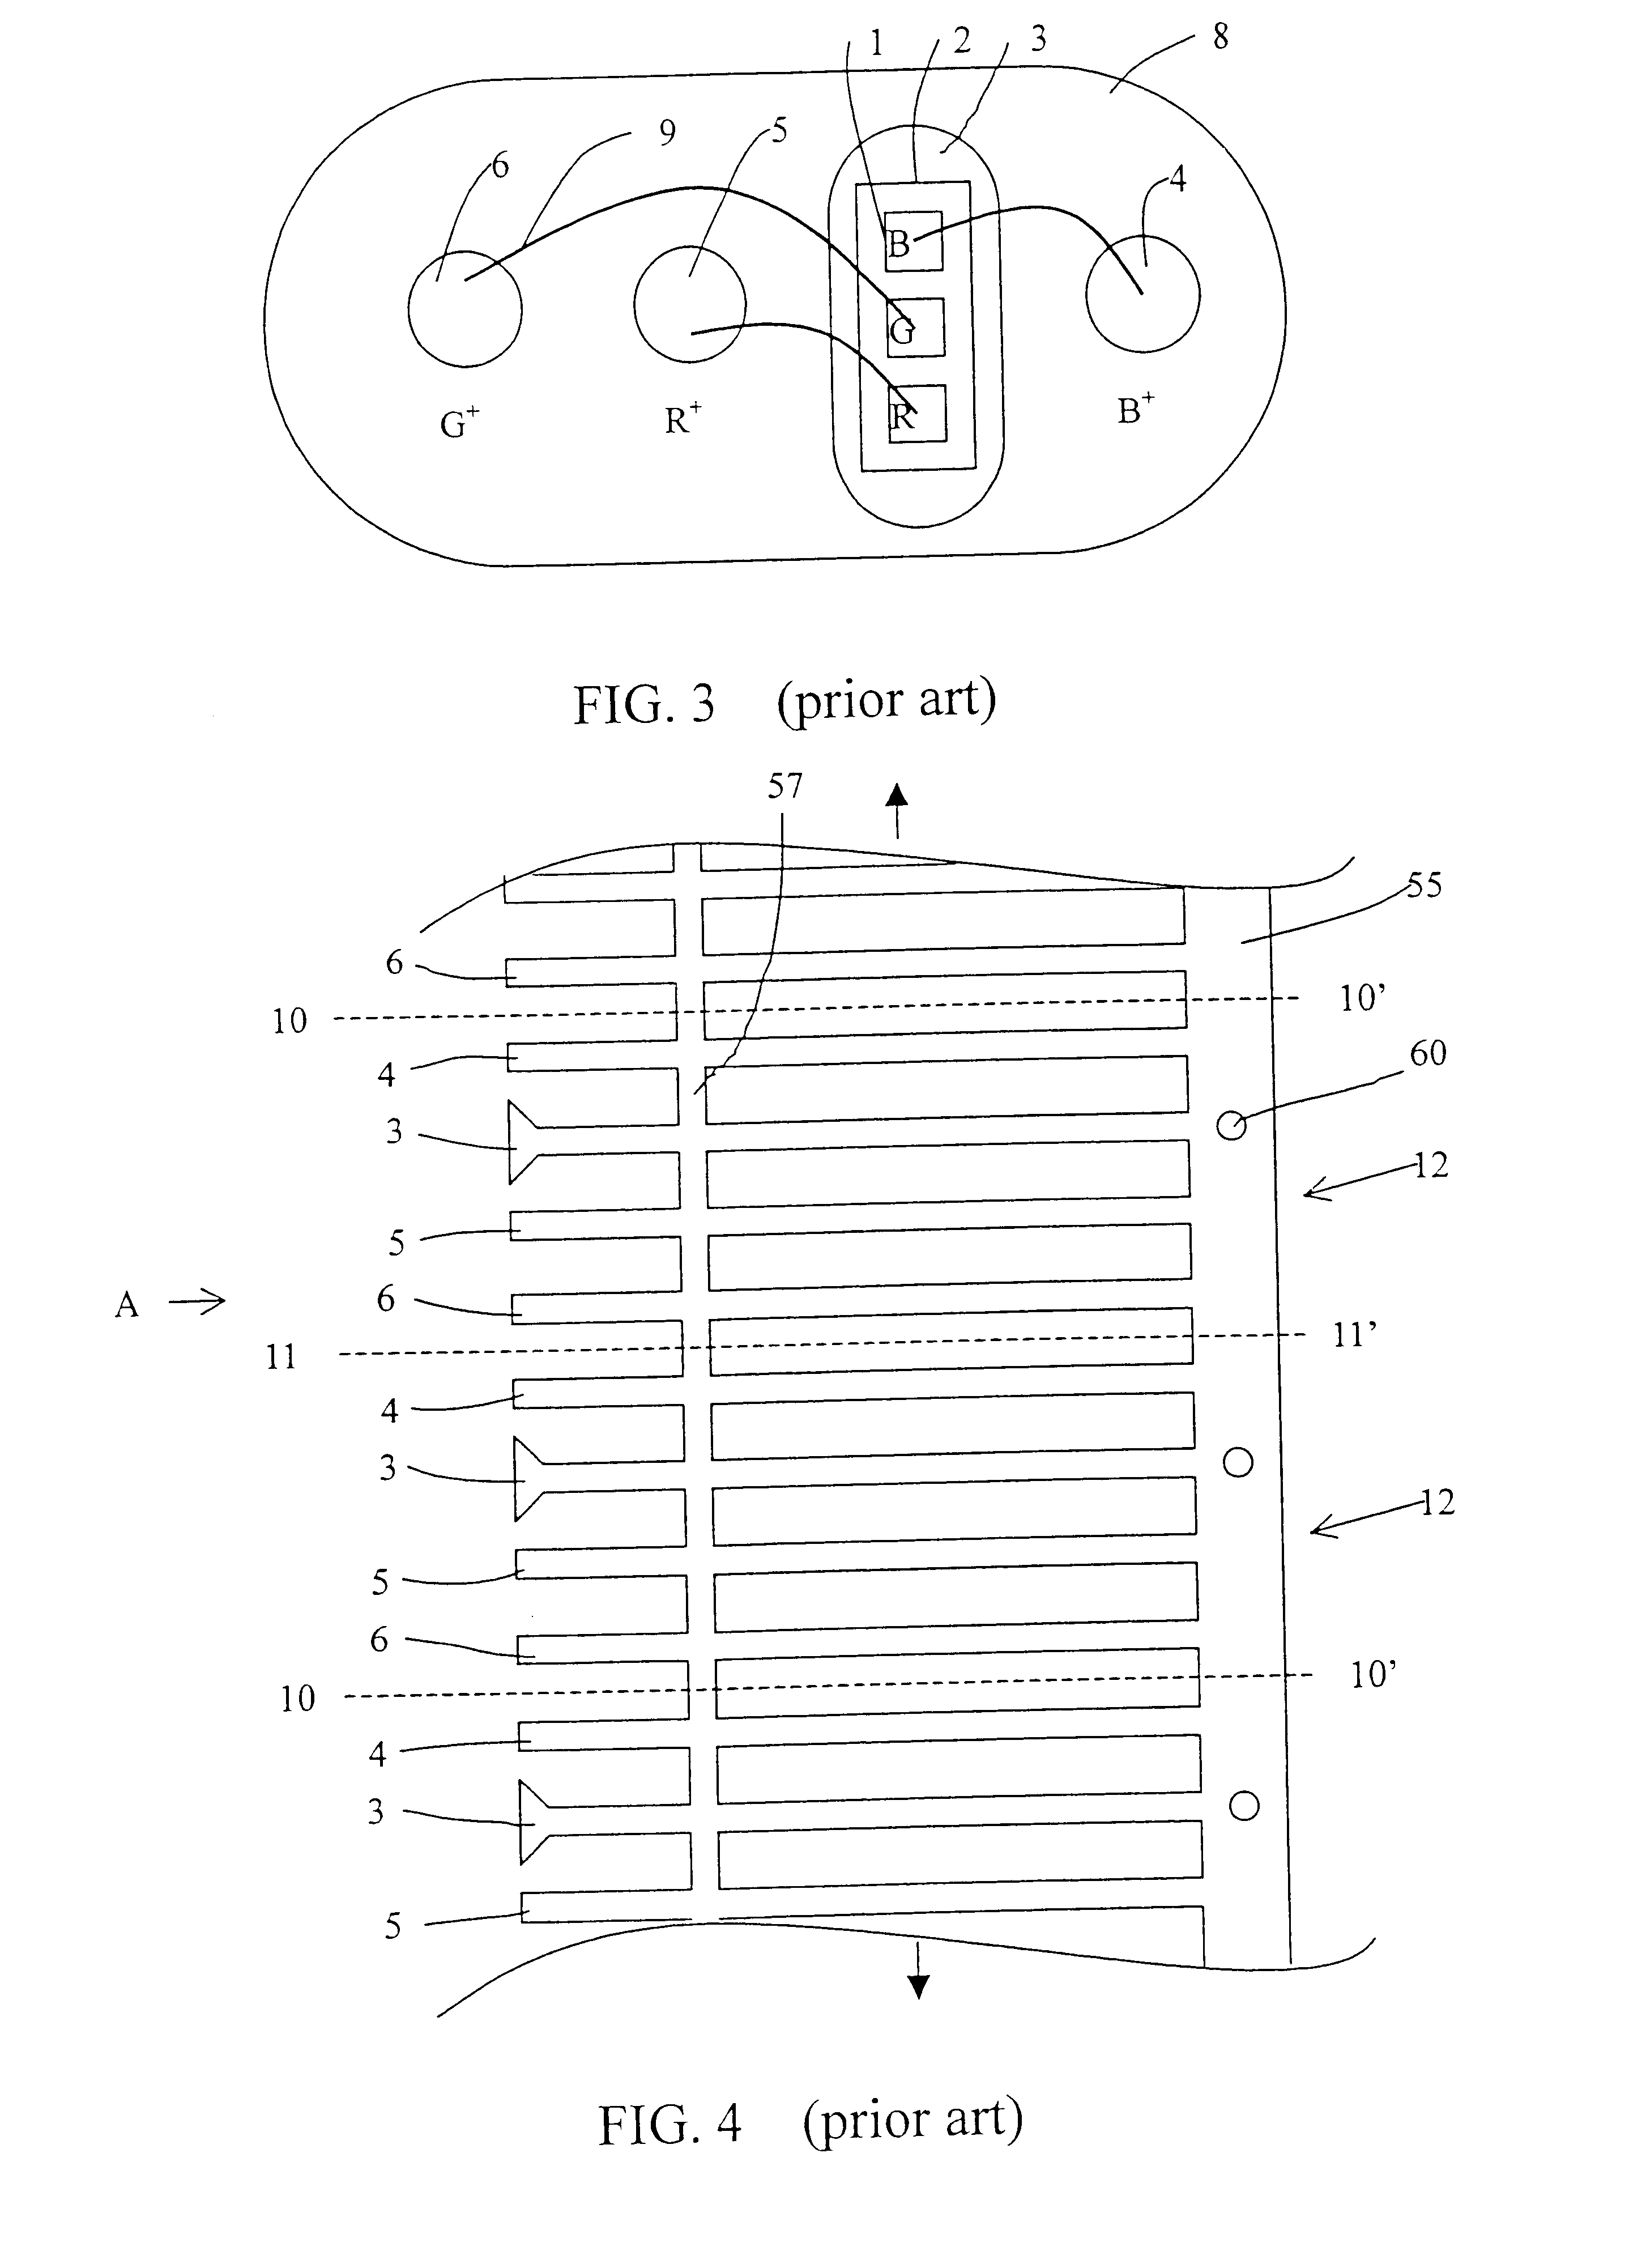 Package socket and package legs structure for led and manufacturing of the same